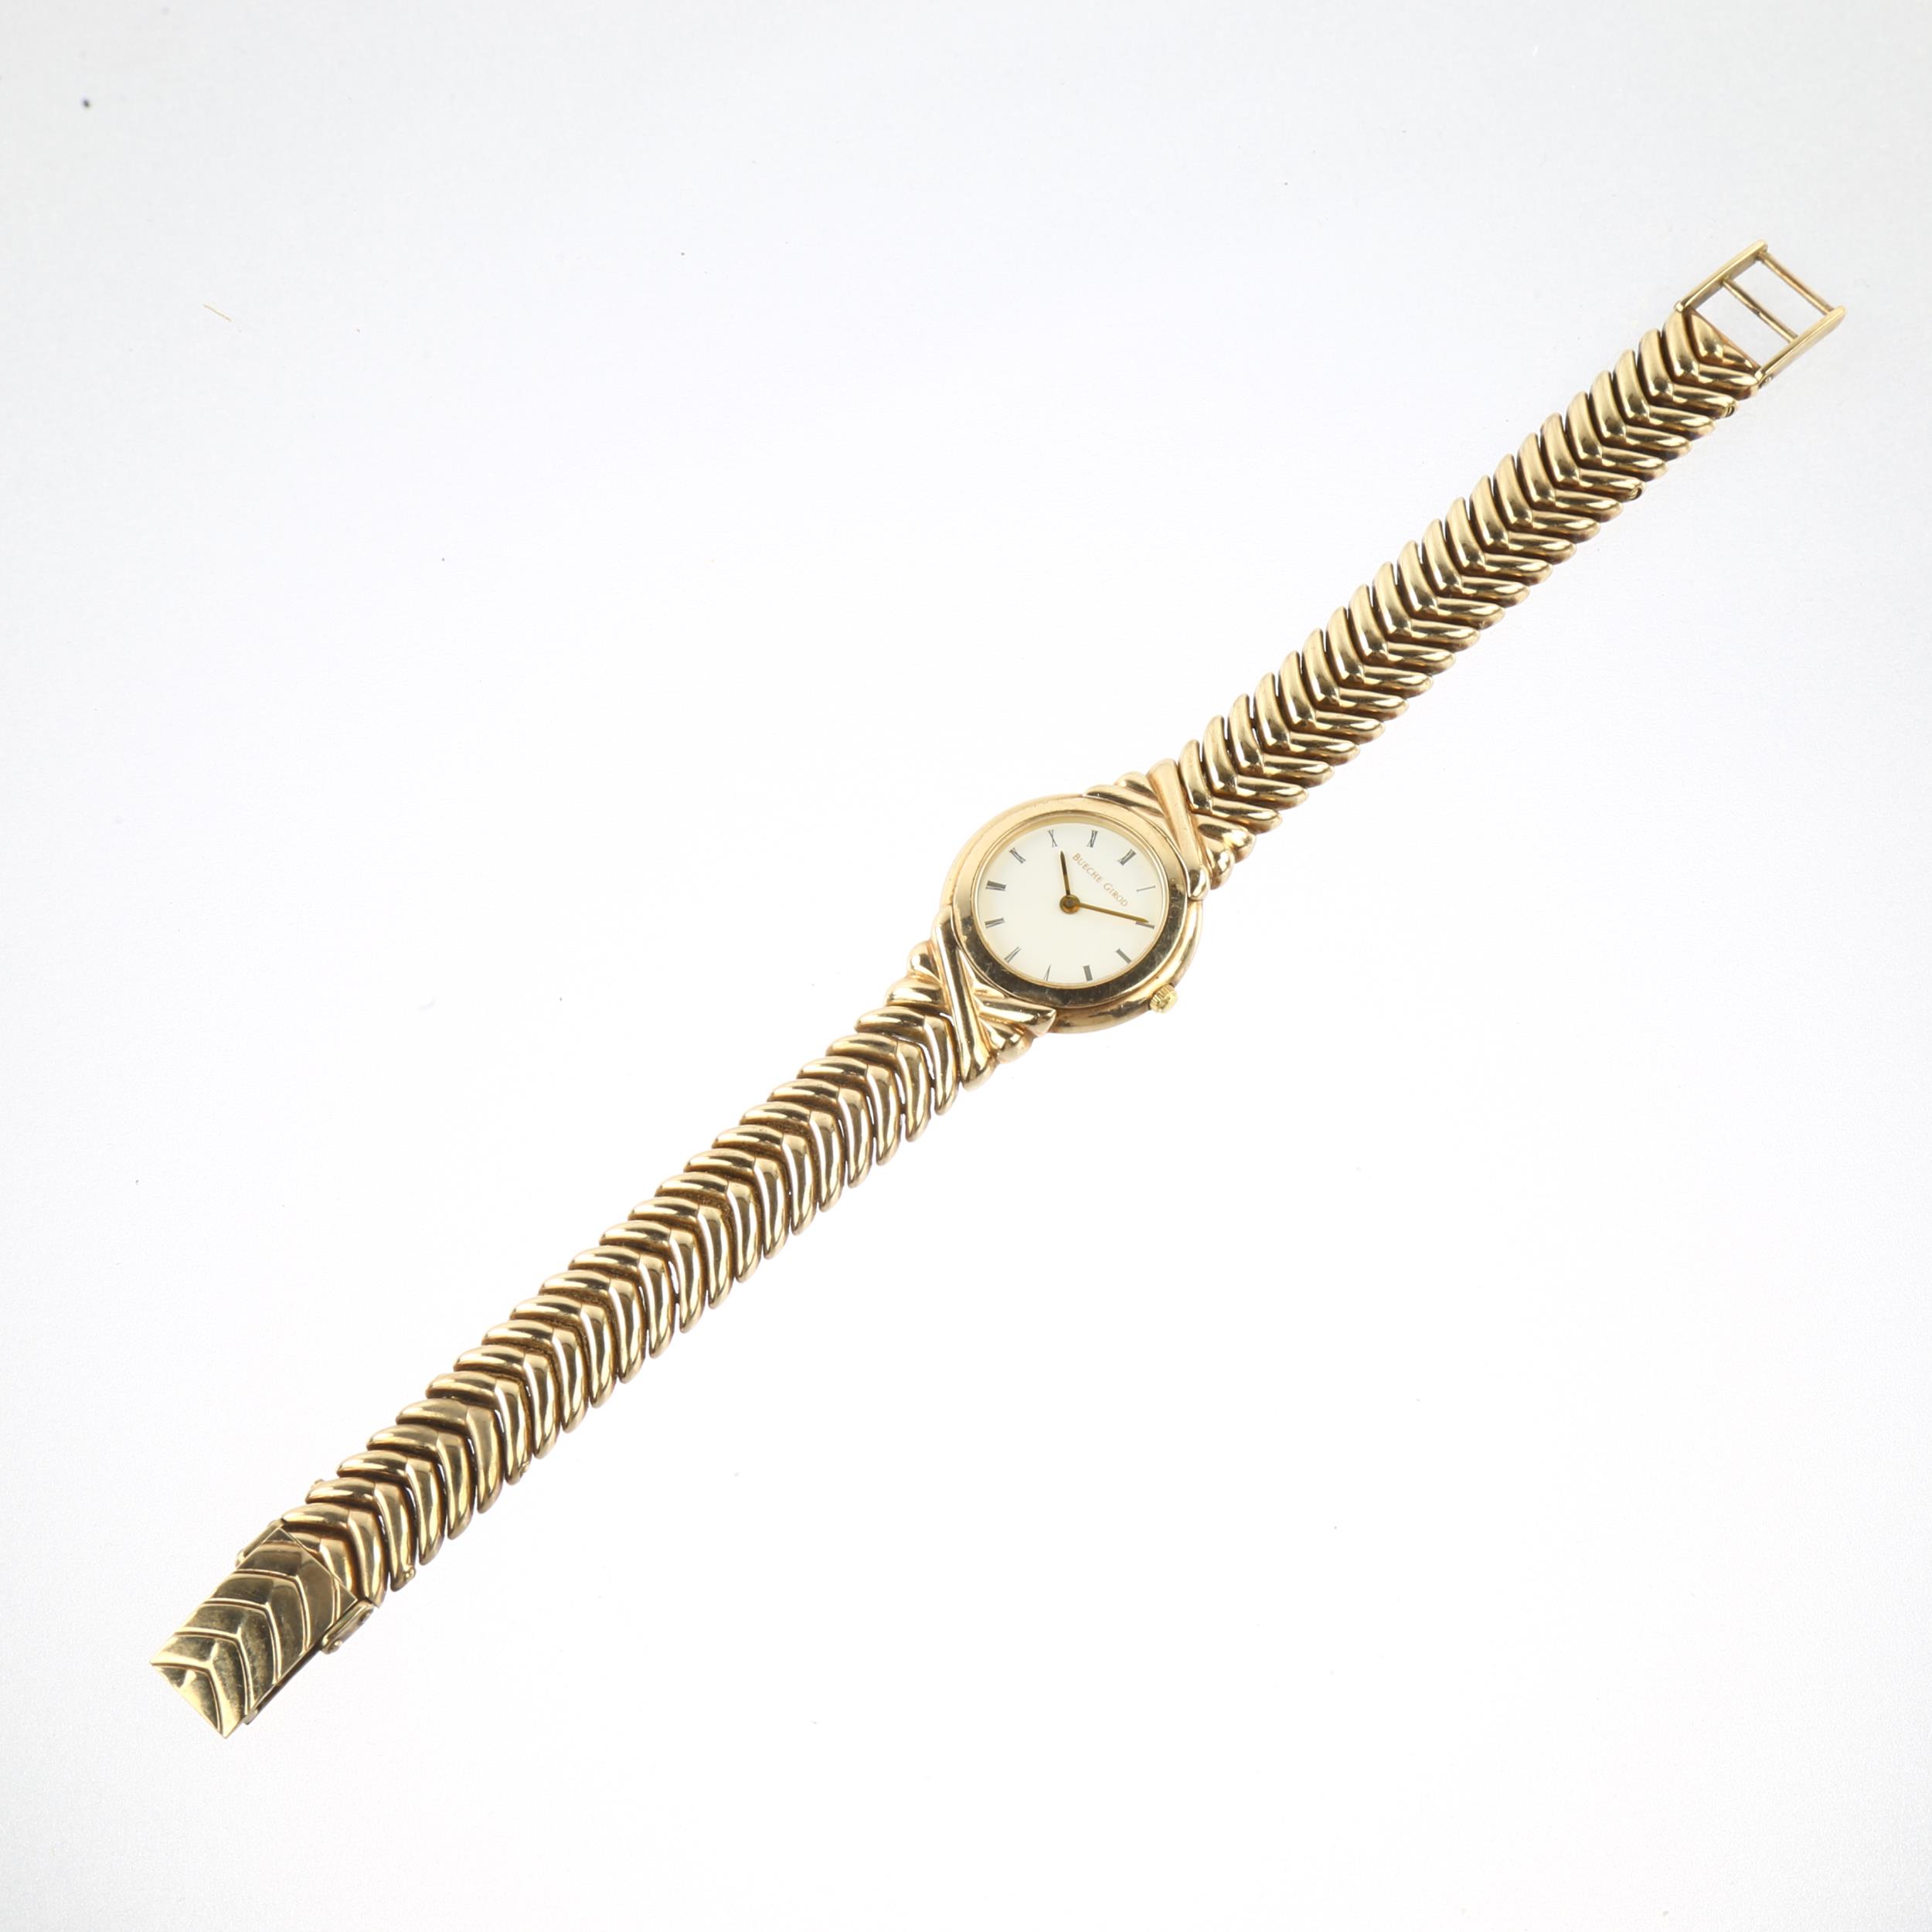 BUECHE GIROD - a lady's 9ct gold quartz bracelet watch, ref. 6006, white dial with Roman numeral - Image 2 of 5